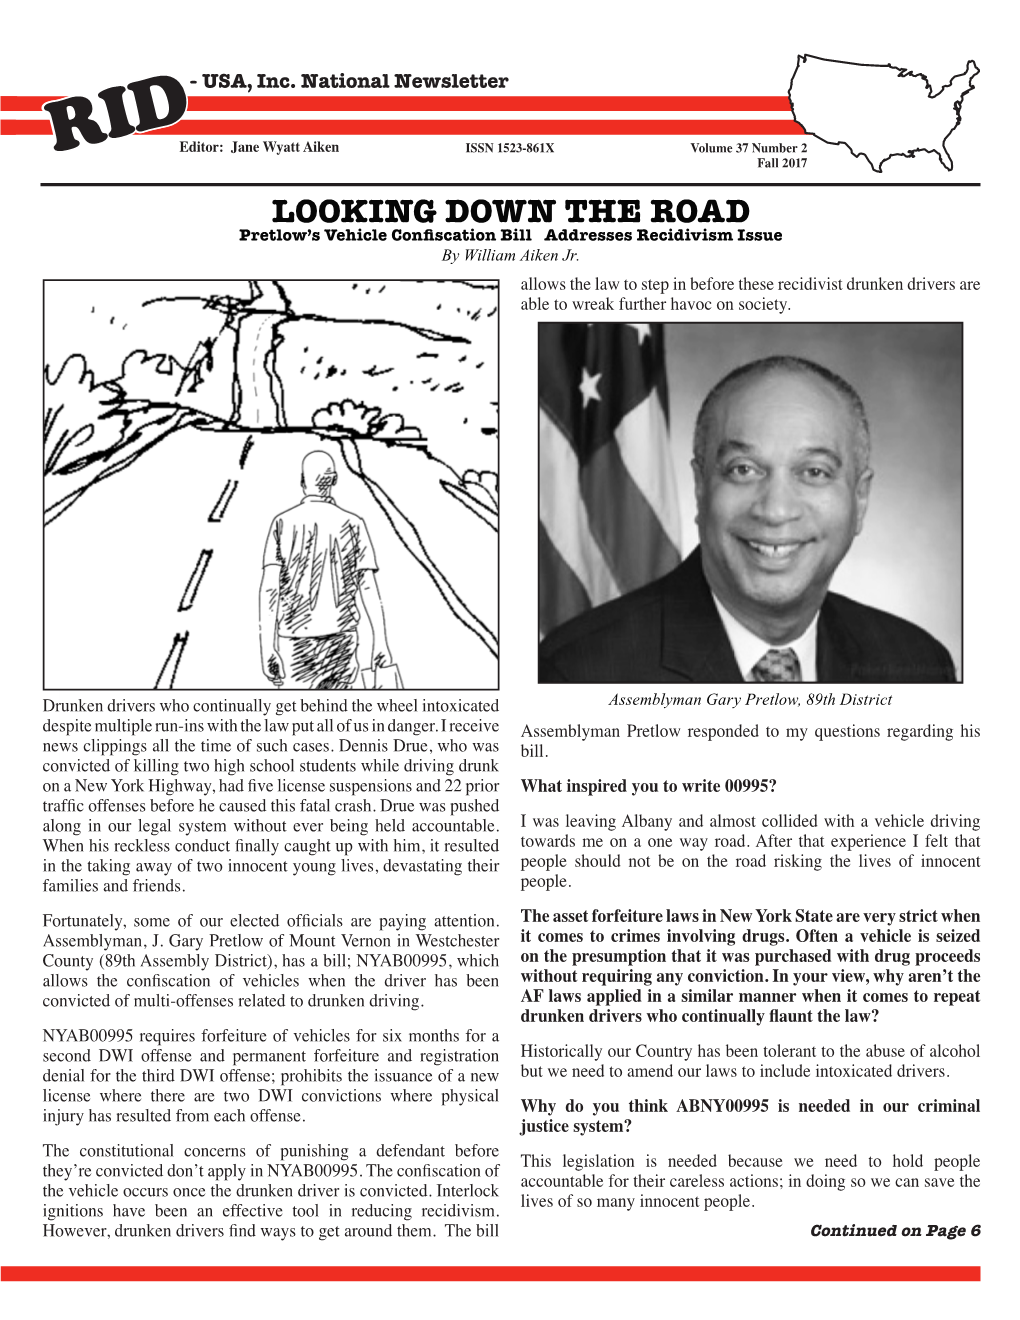 LOOKING DOWN the ROAD Inside This Issue: Pretlow’S Vehicle Confiscation Bill Addresses Recidivism Issue by William Aiken Jr